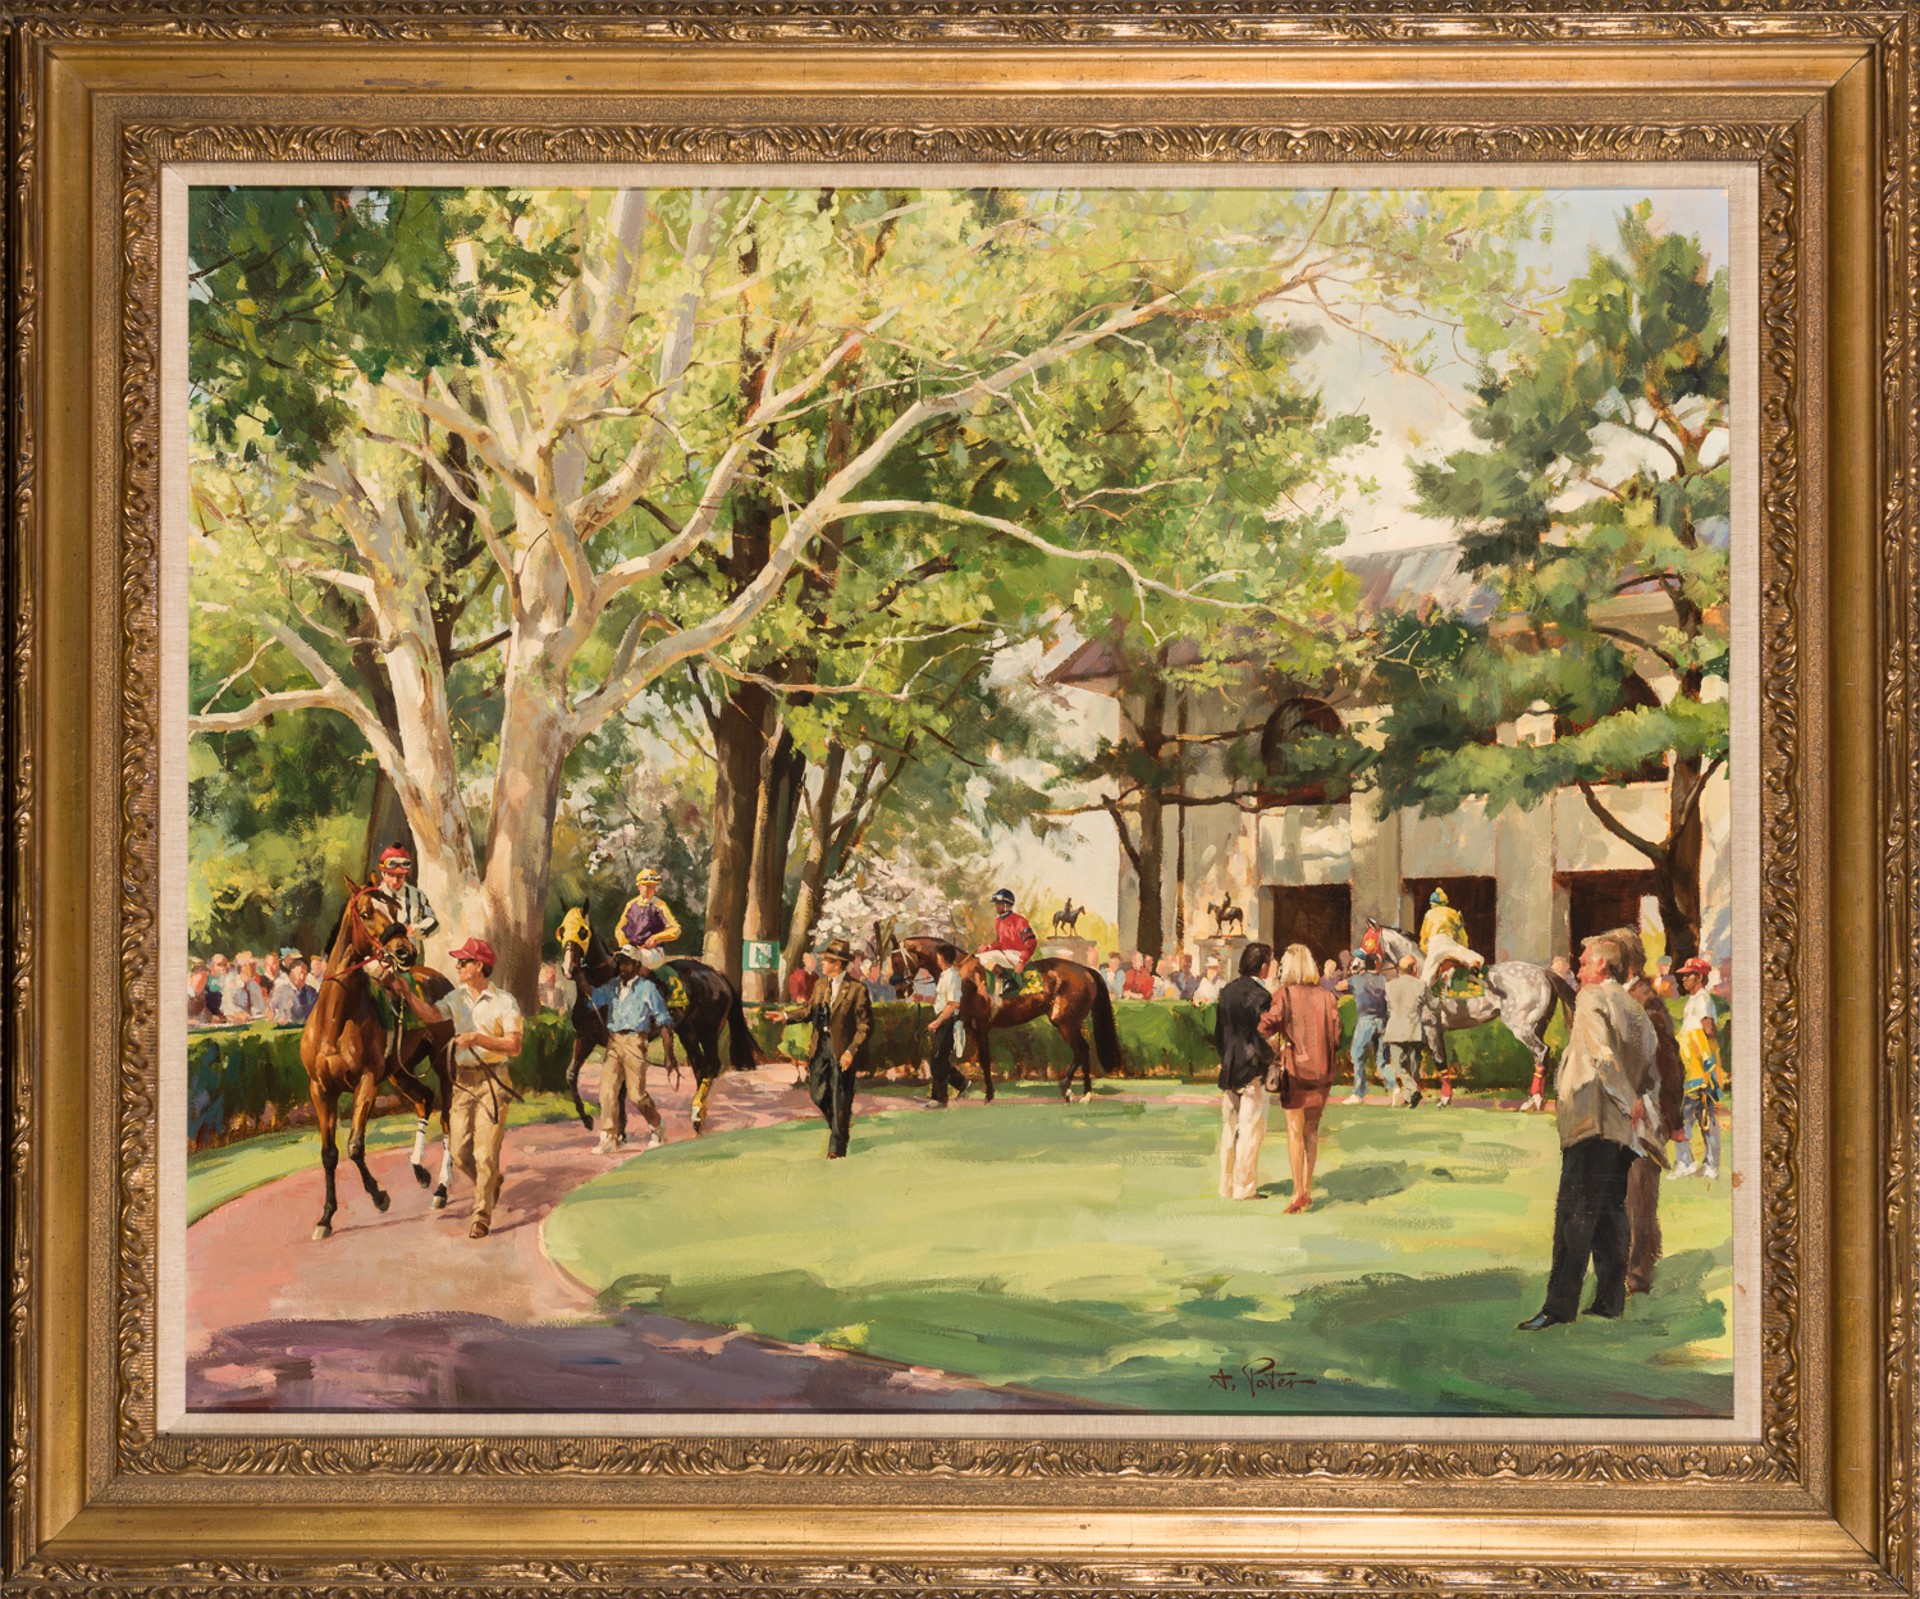 KEENELAND PADDOCK by Andre Pater